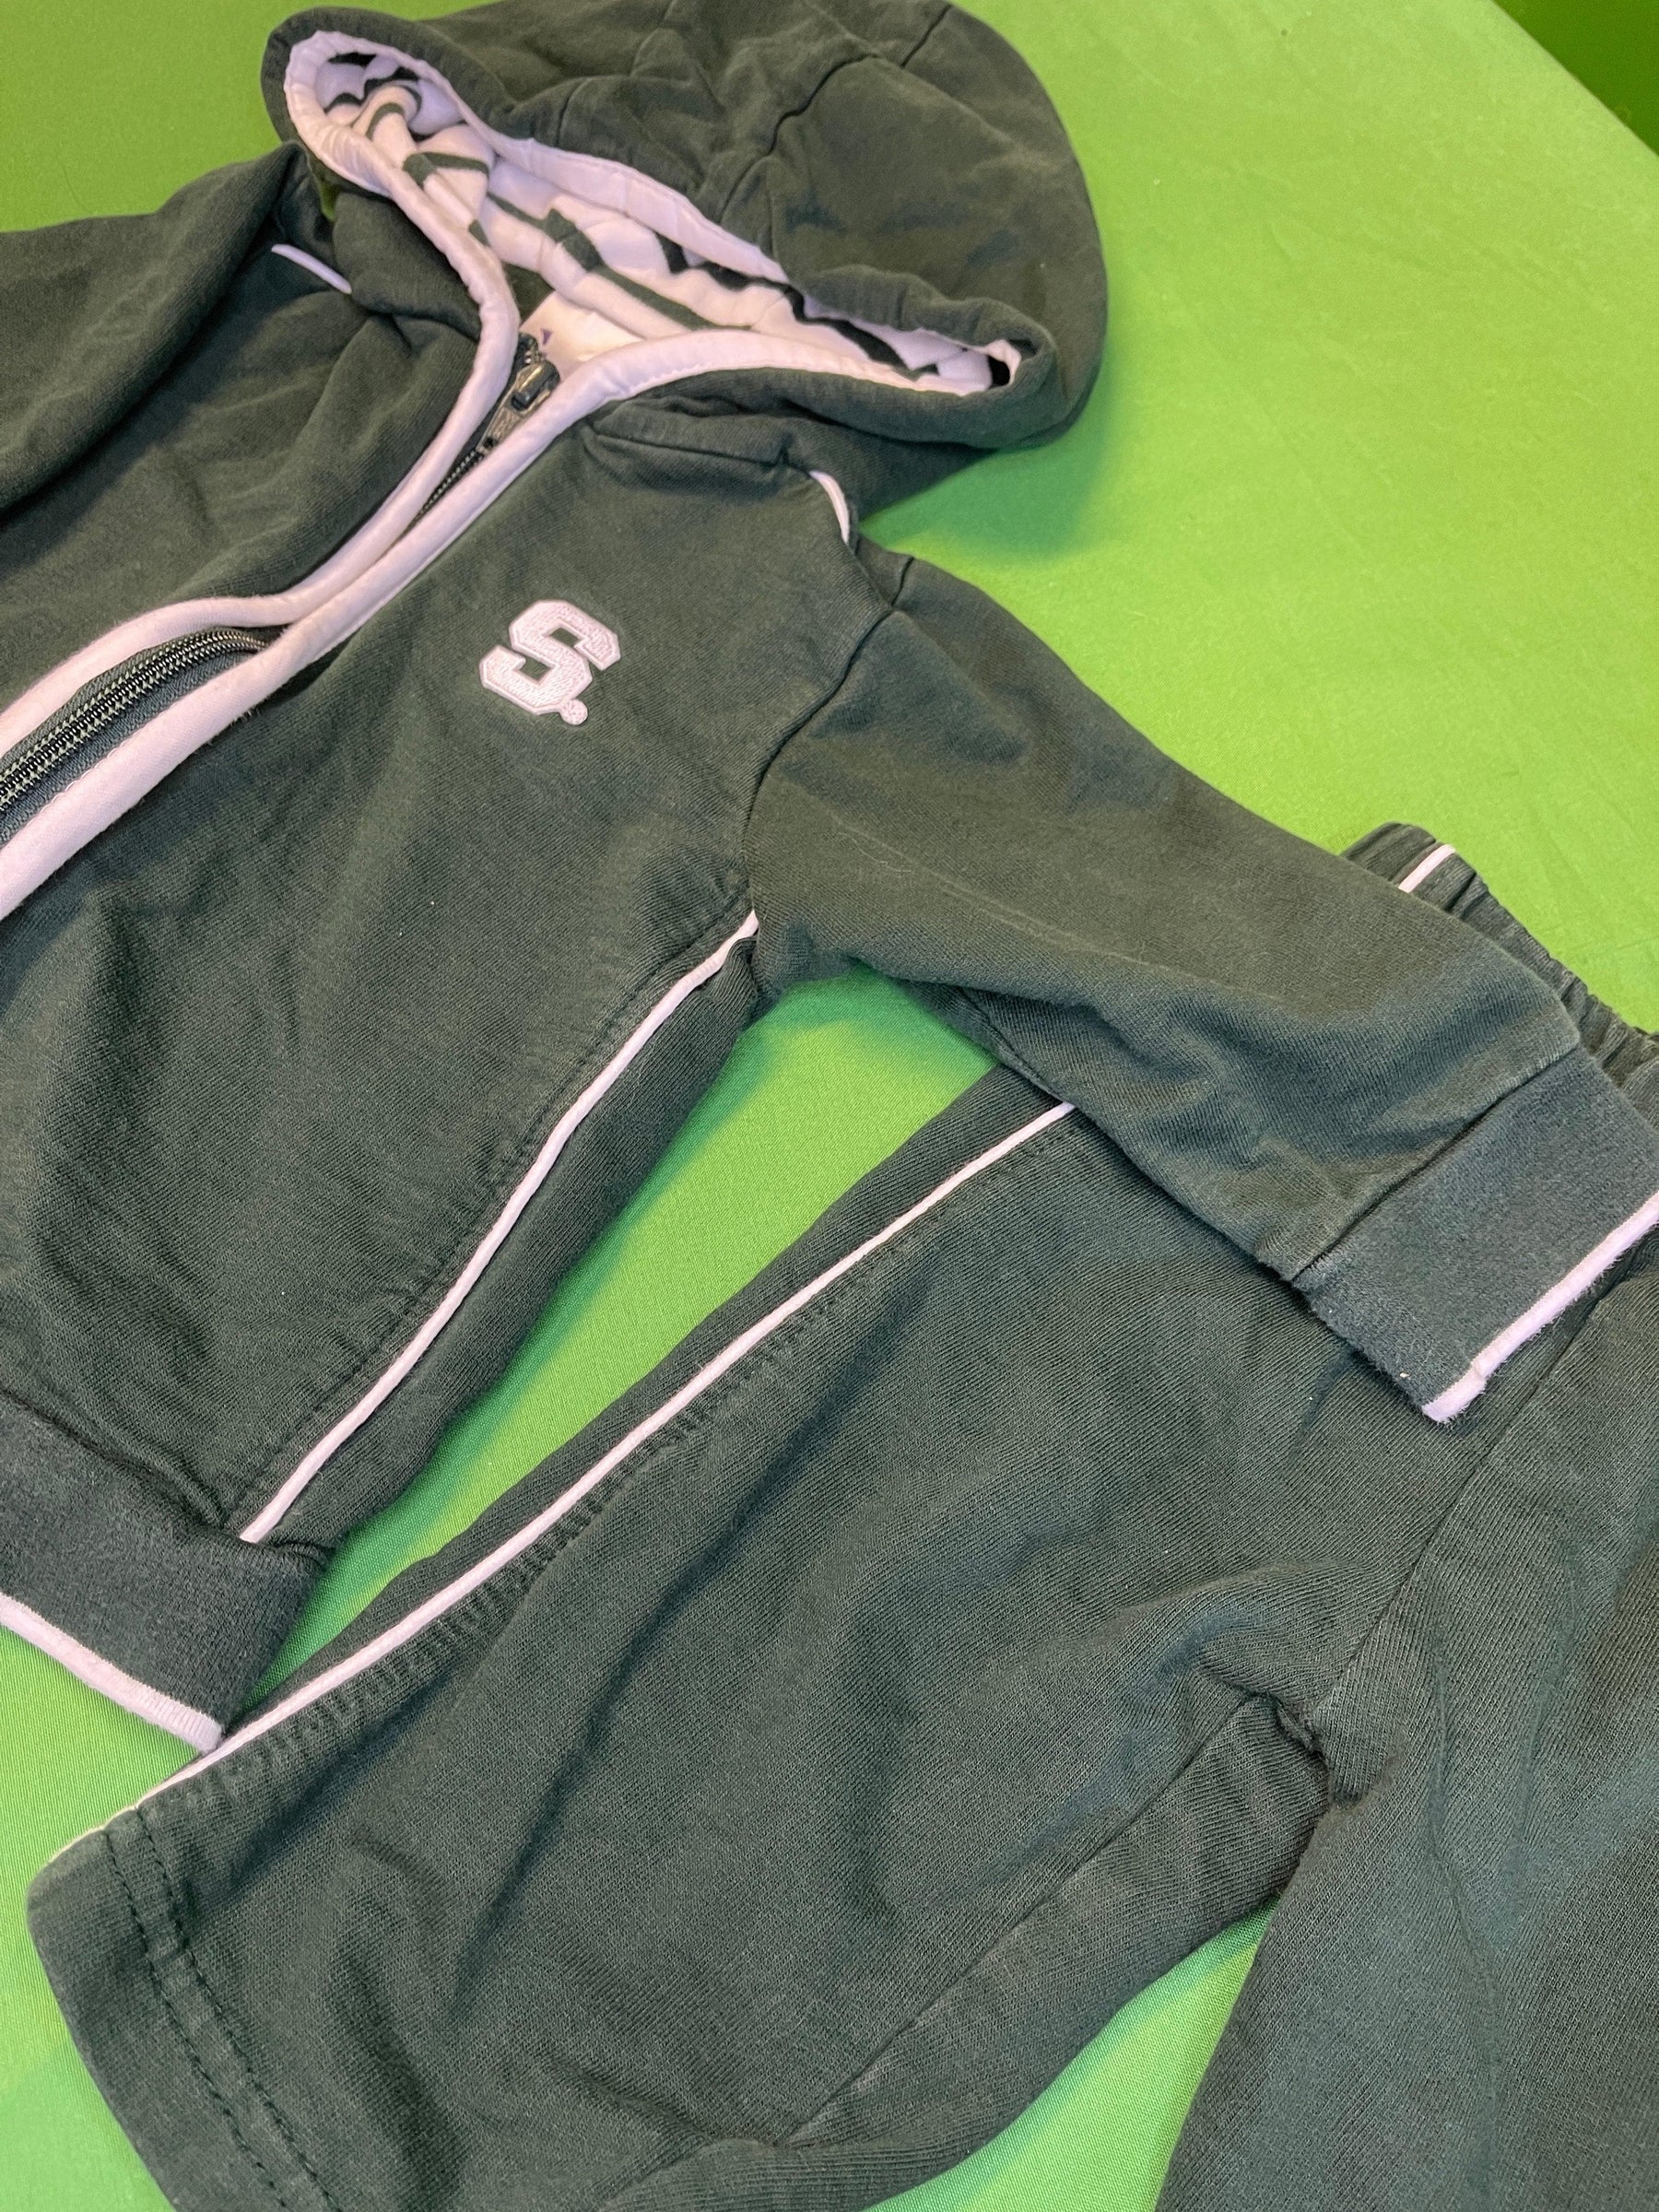 NCAA Michigan State Spartans 2-pc Track Suit Toddler 24 Months